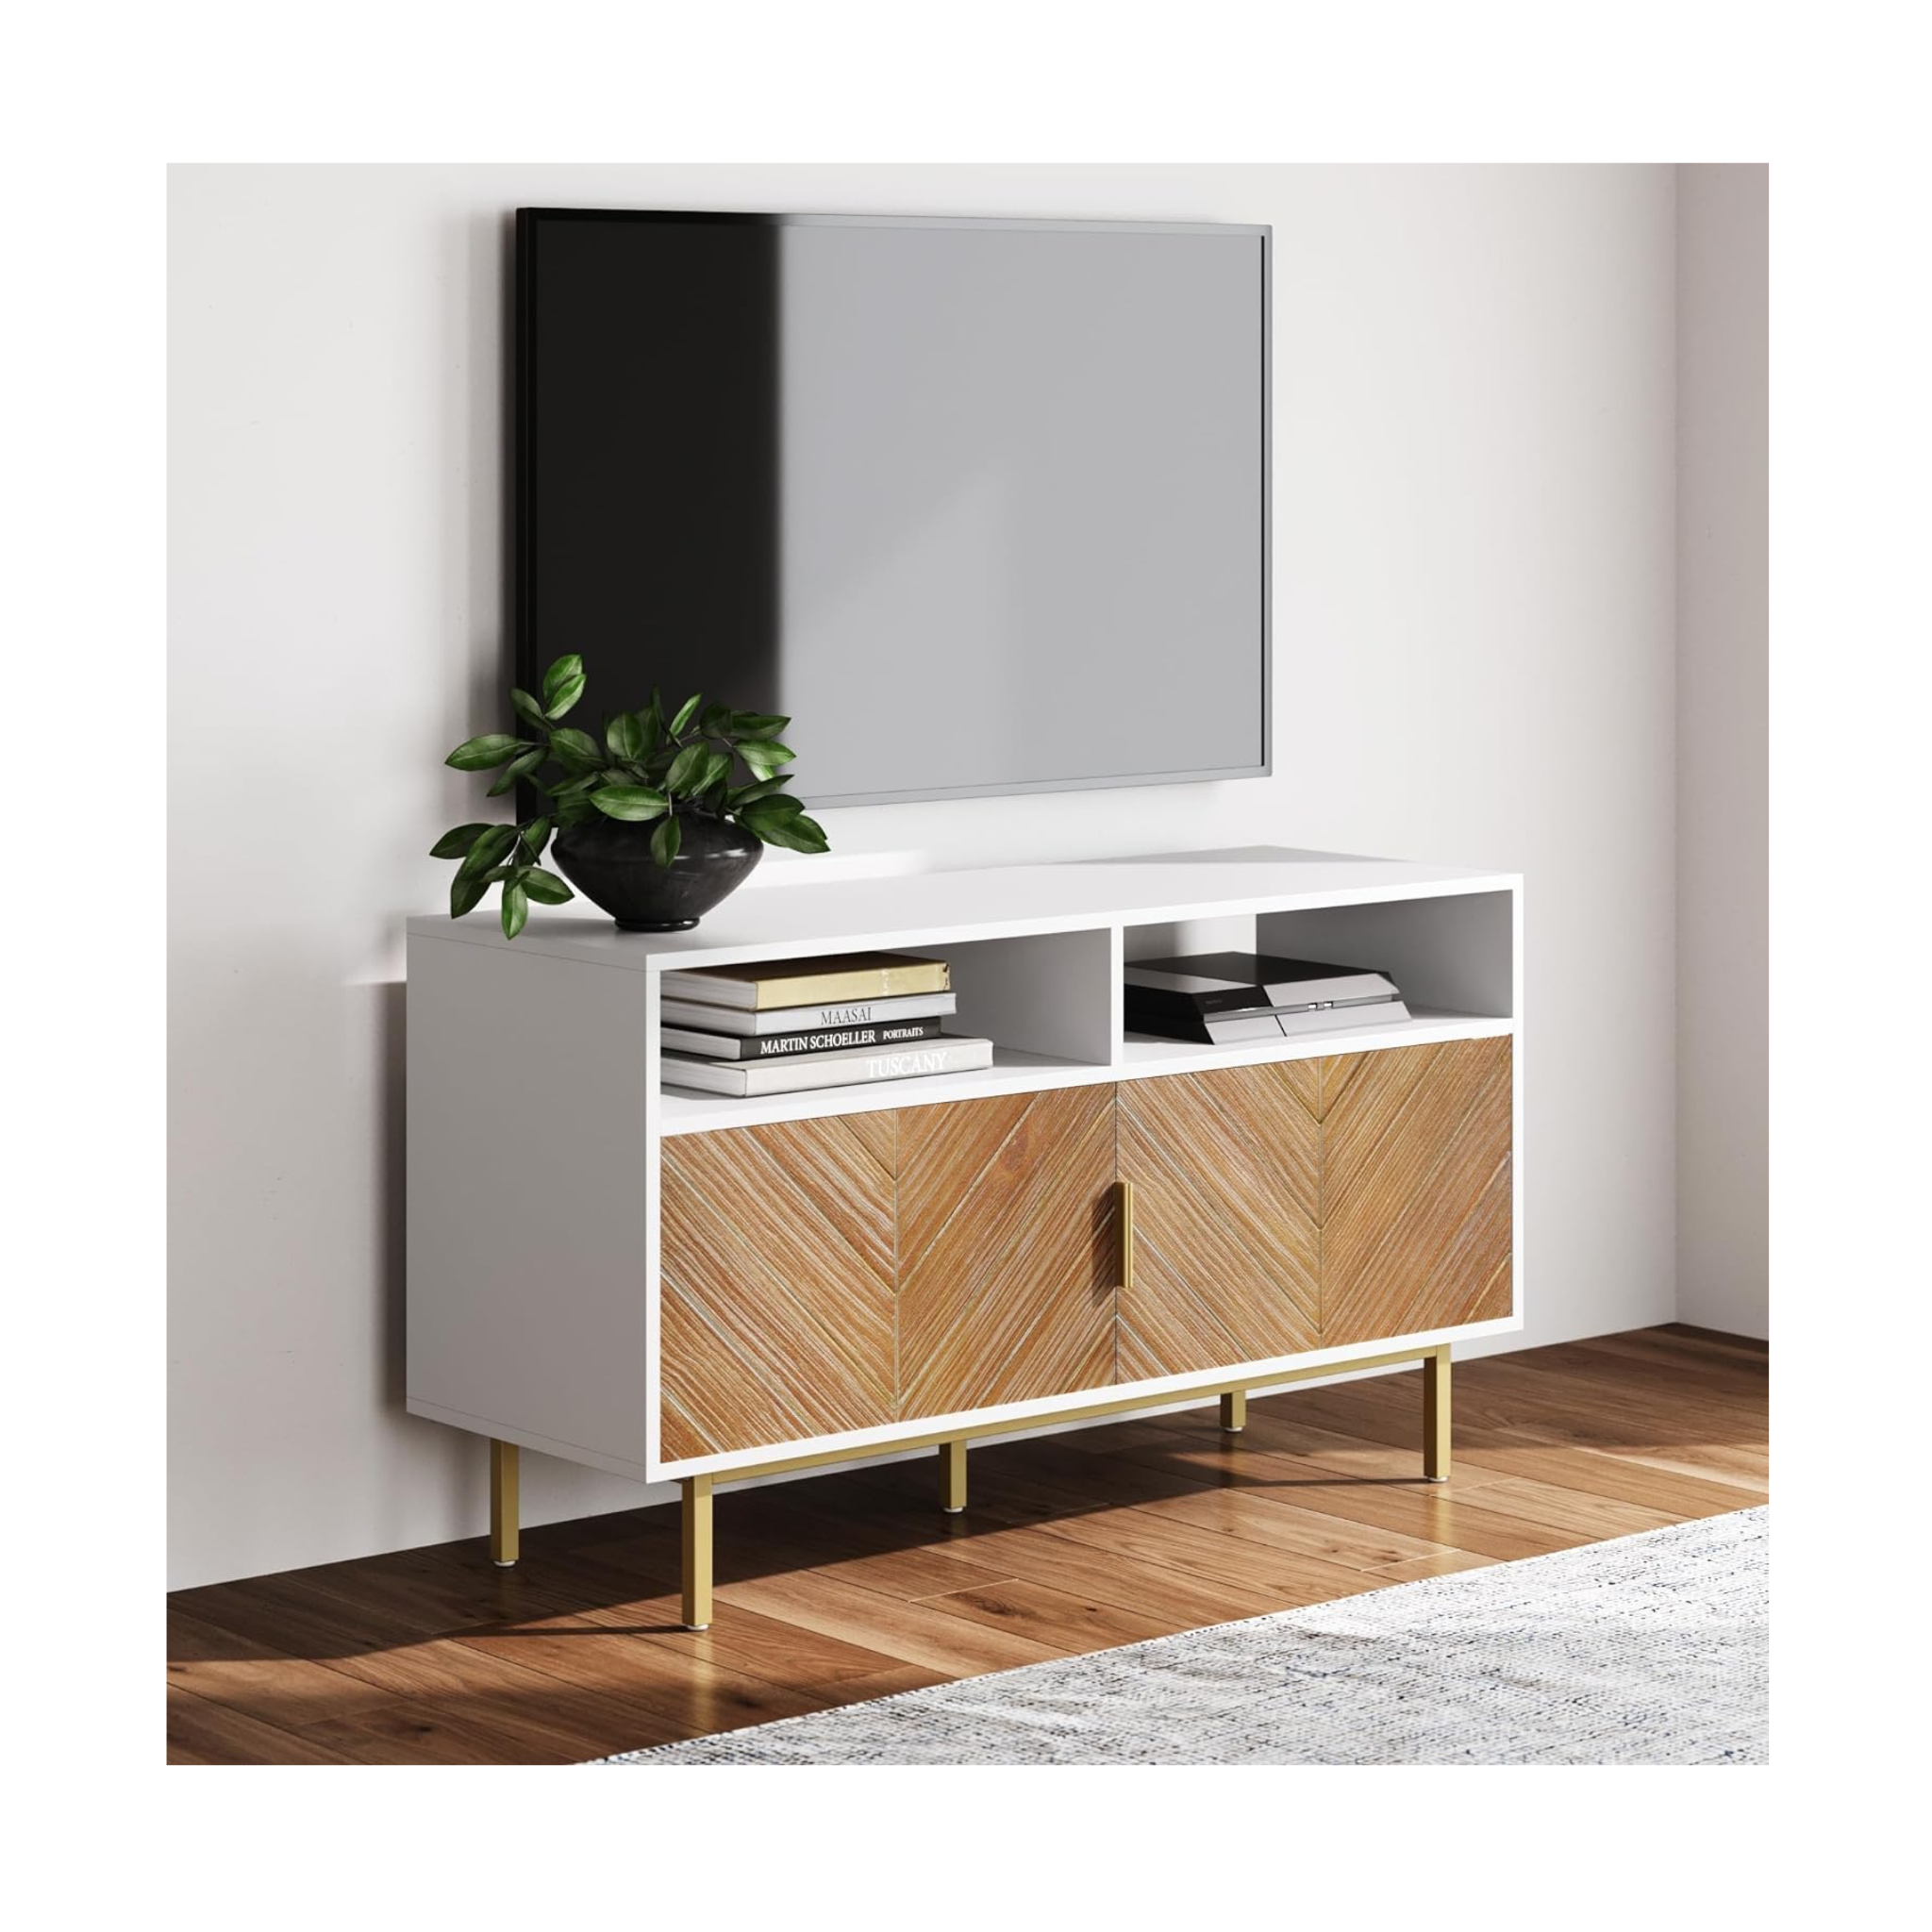 Nathan James Izsak Media Console, TV Stand with Herringbone Doors and Cubby Storage in a Fir Wood Finish